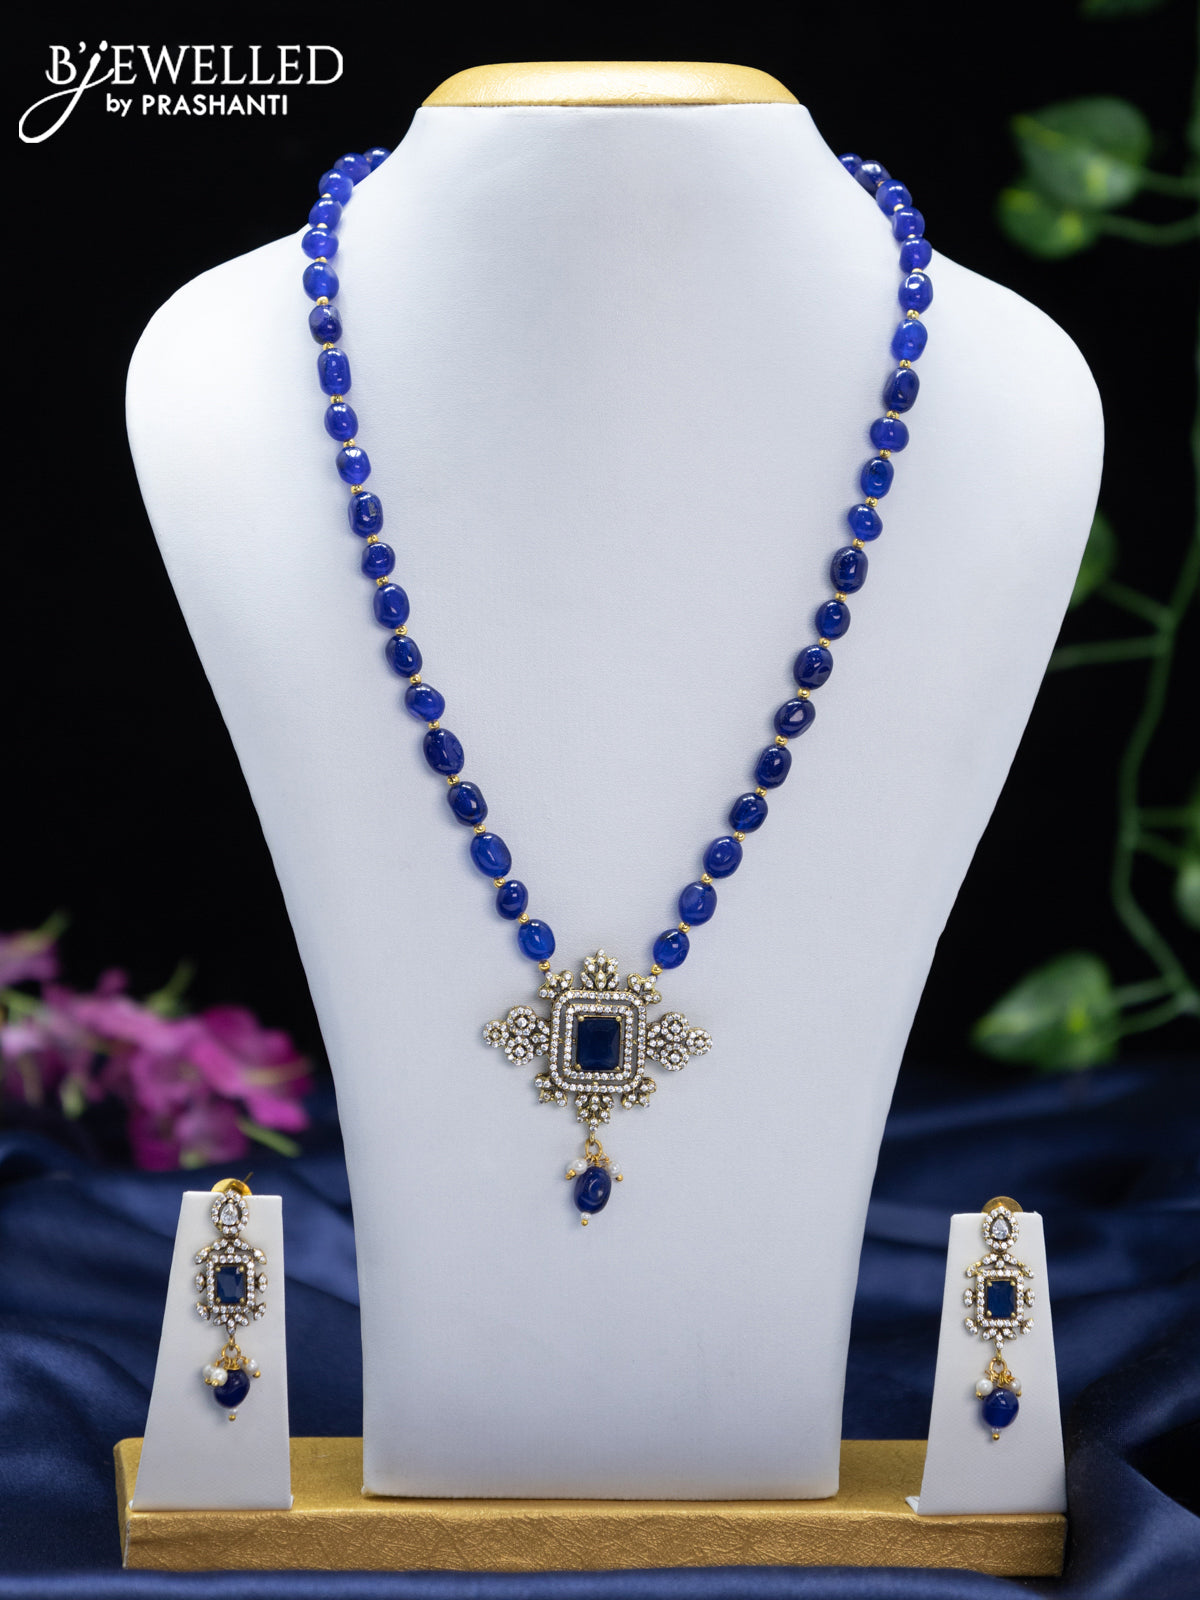 Beaded blue necklace with sapphire & cz stones and beads hangings in victorian finish